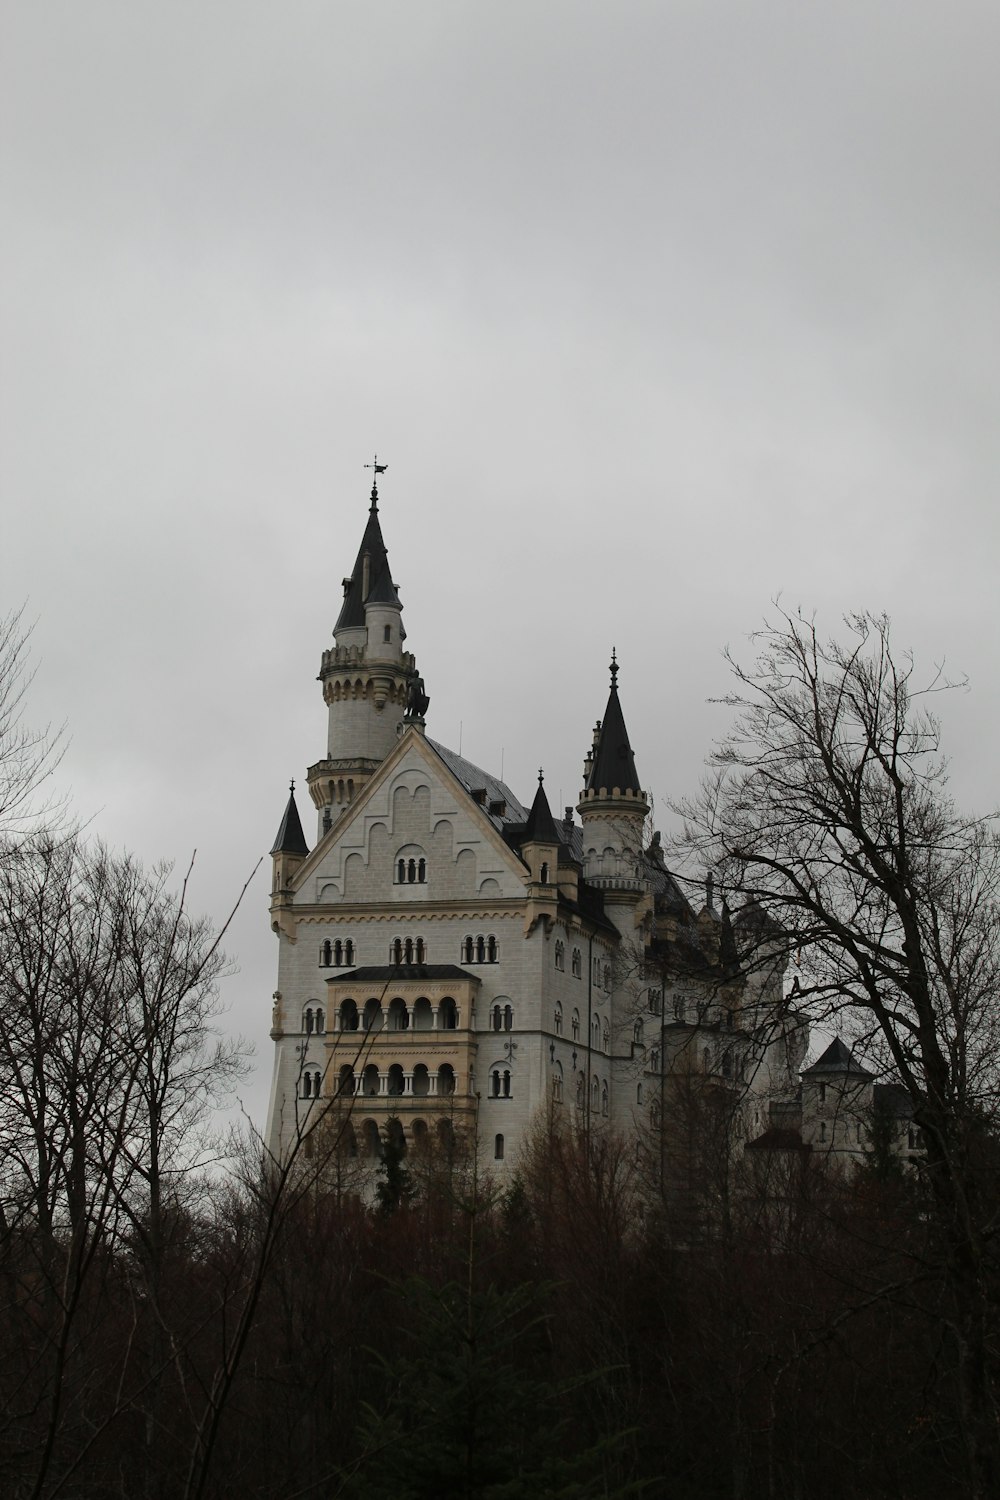 a large castle with a clock on the top of it